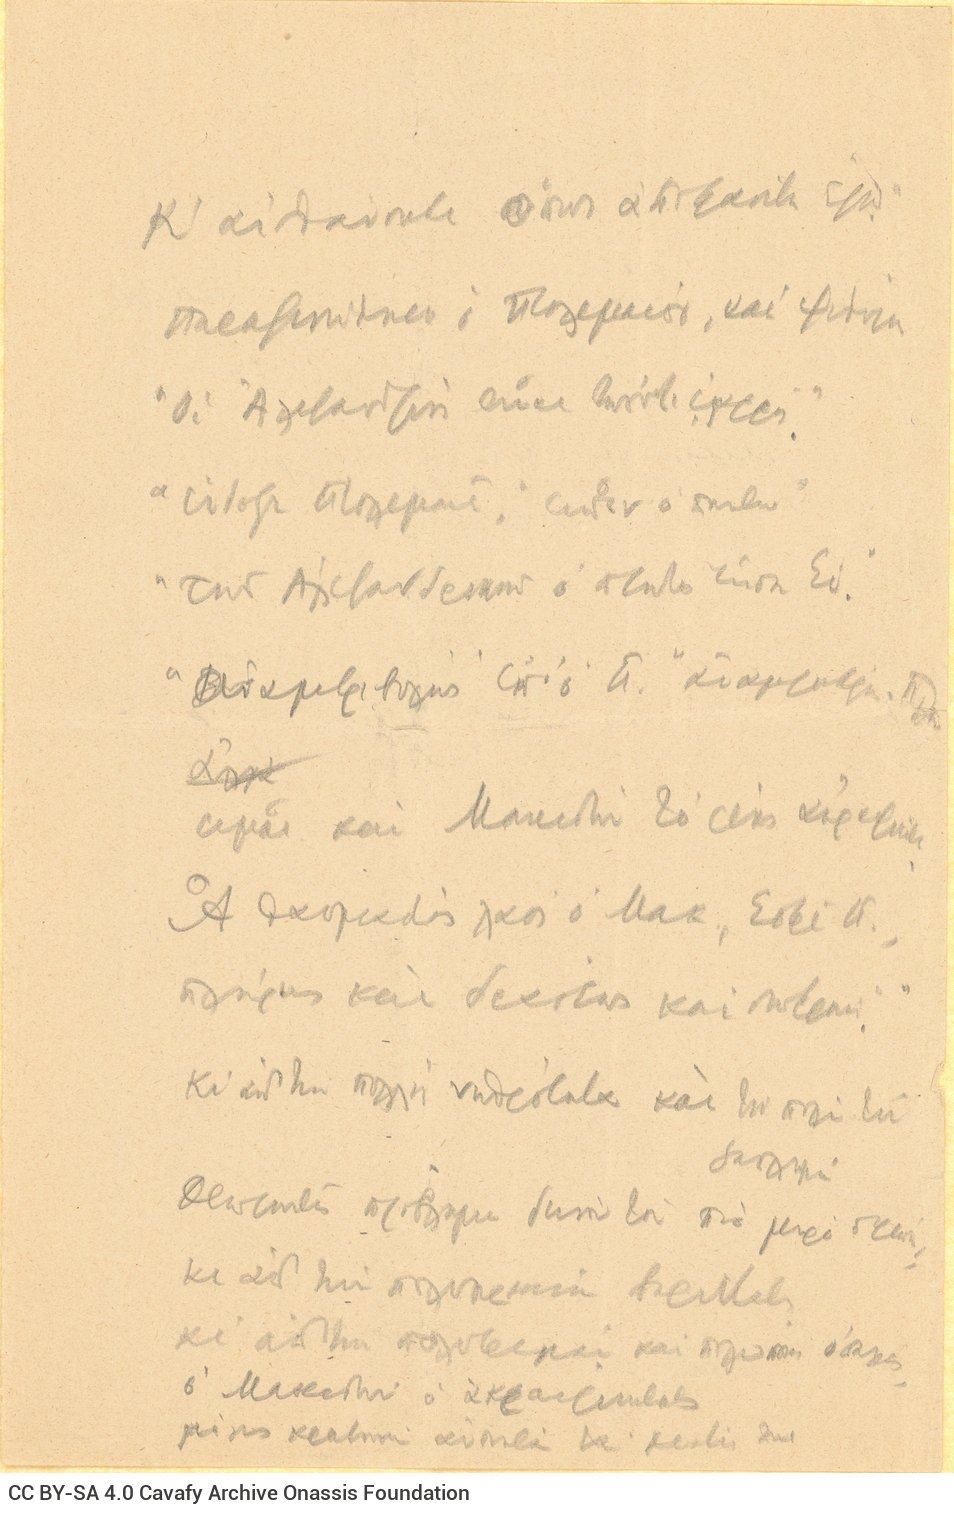 Handwritten drafts of the poem "Ptolemy the Benefactor (or Malefactor)" on all pages of a double sheet notepaper; on three